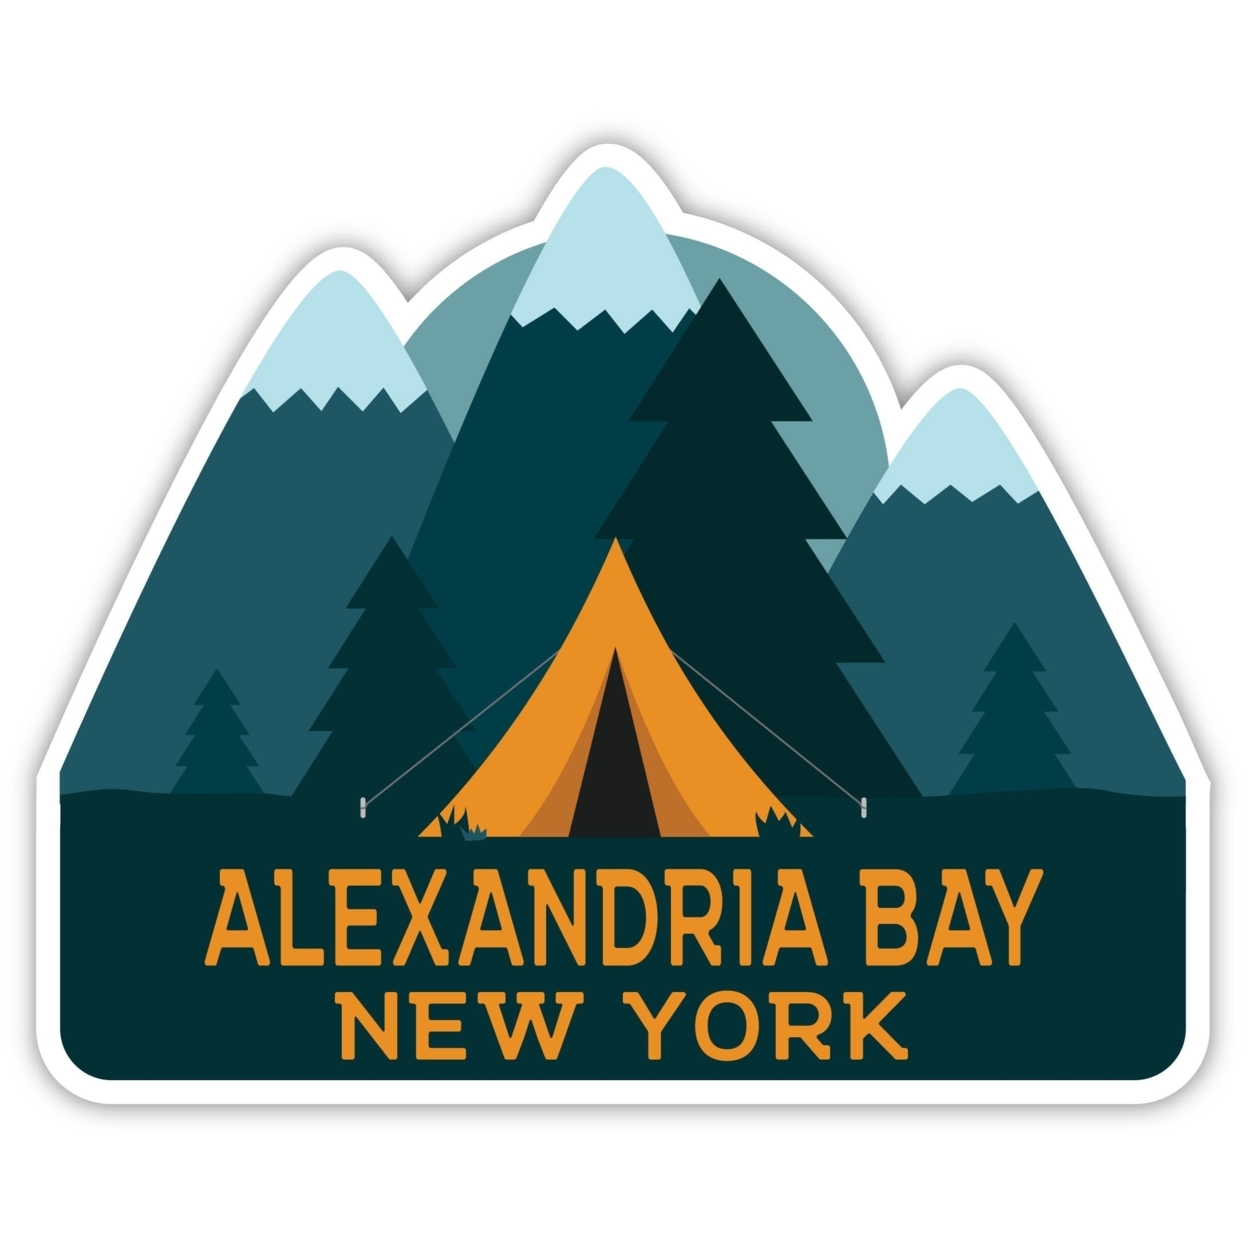 Alexandria Bay New York Souvenir Decorative Stickers (Choose Theme And Size) - 4-Pack, 2-Inch, Bear